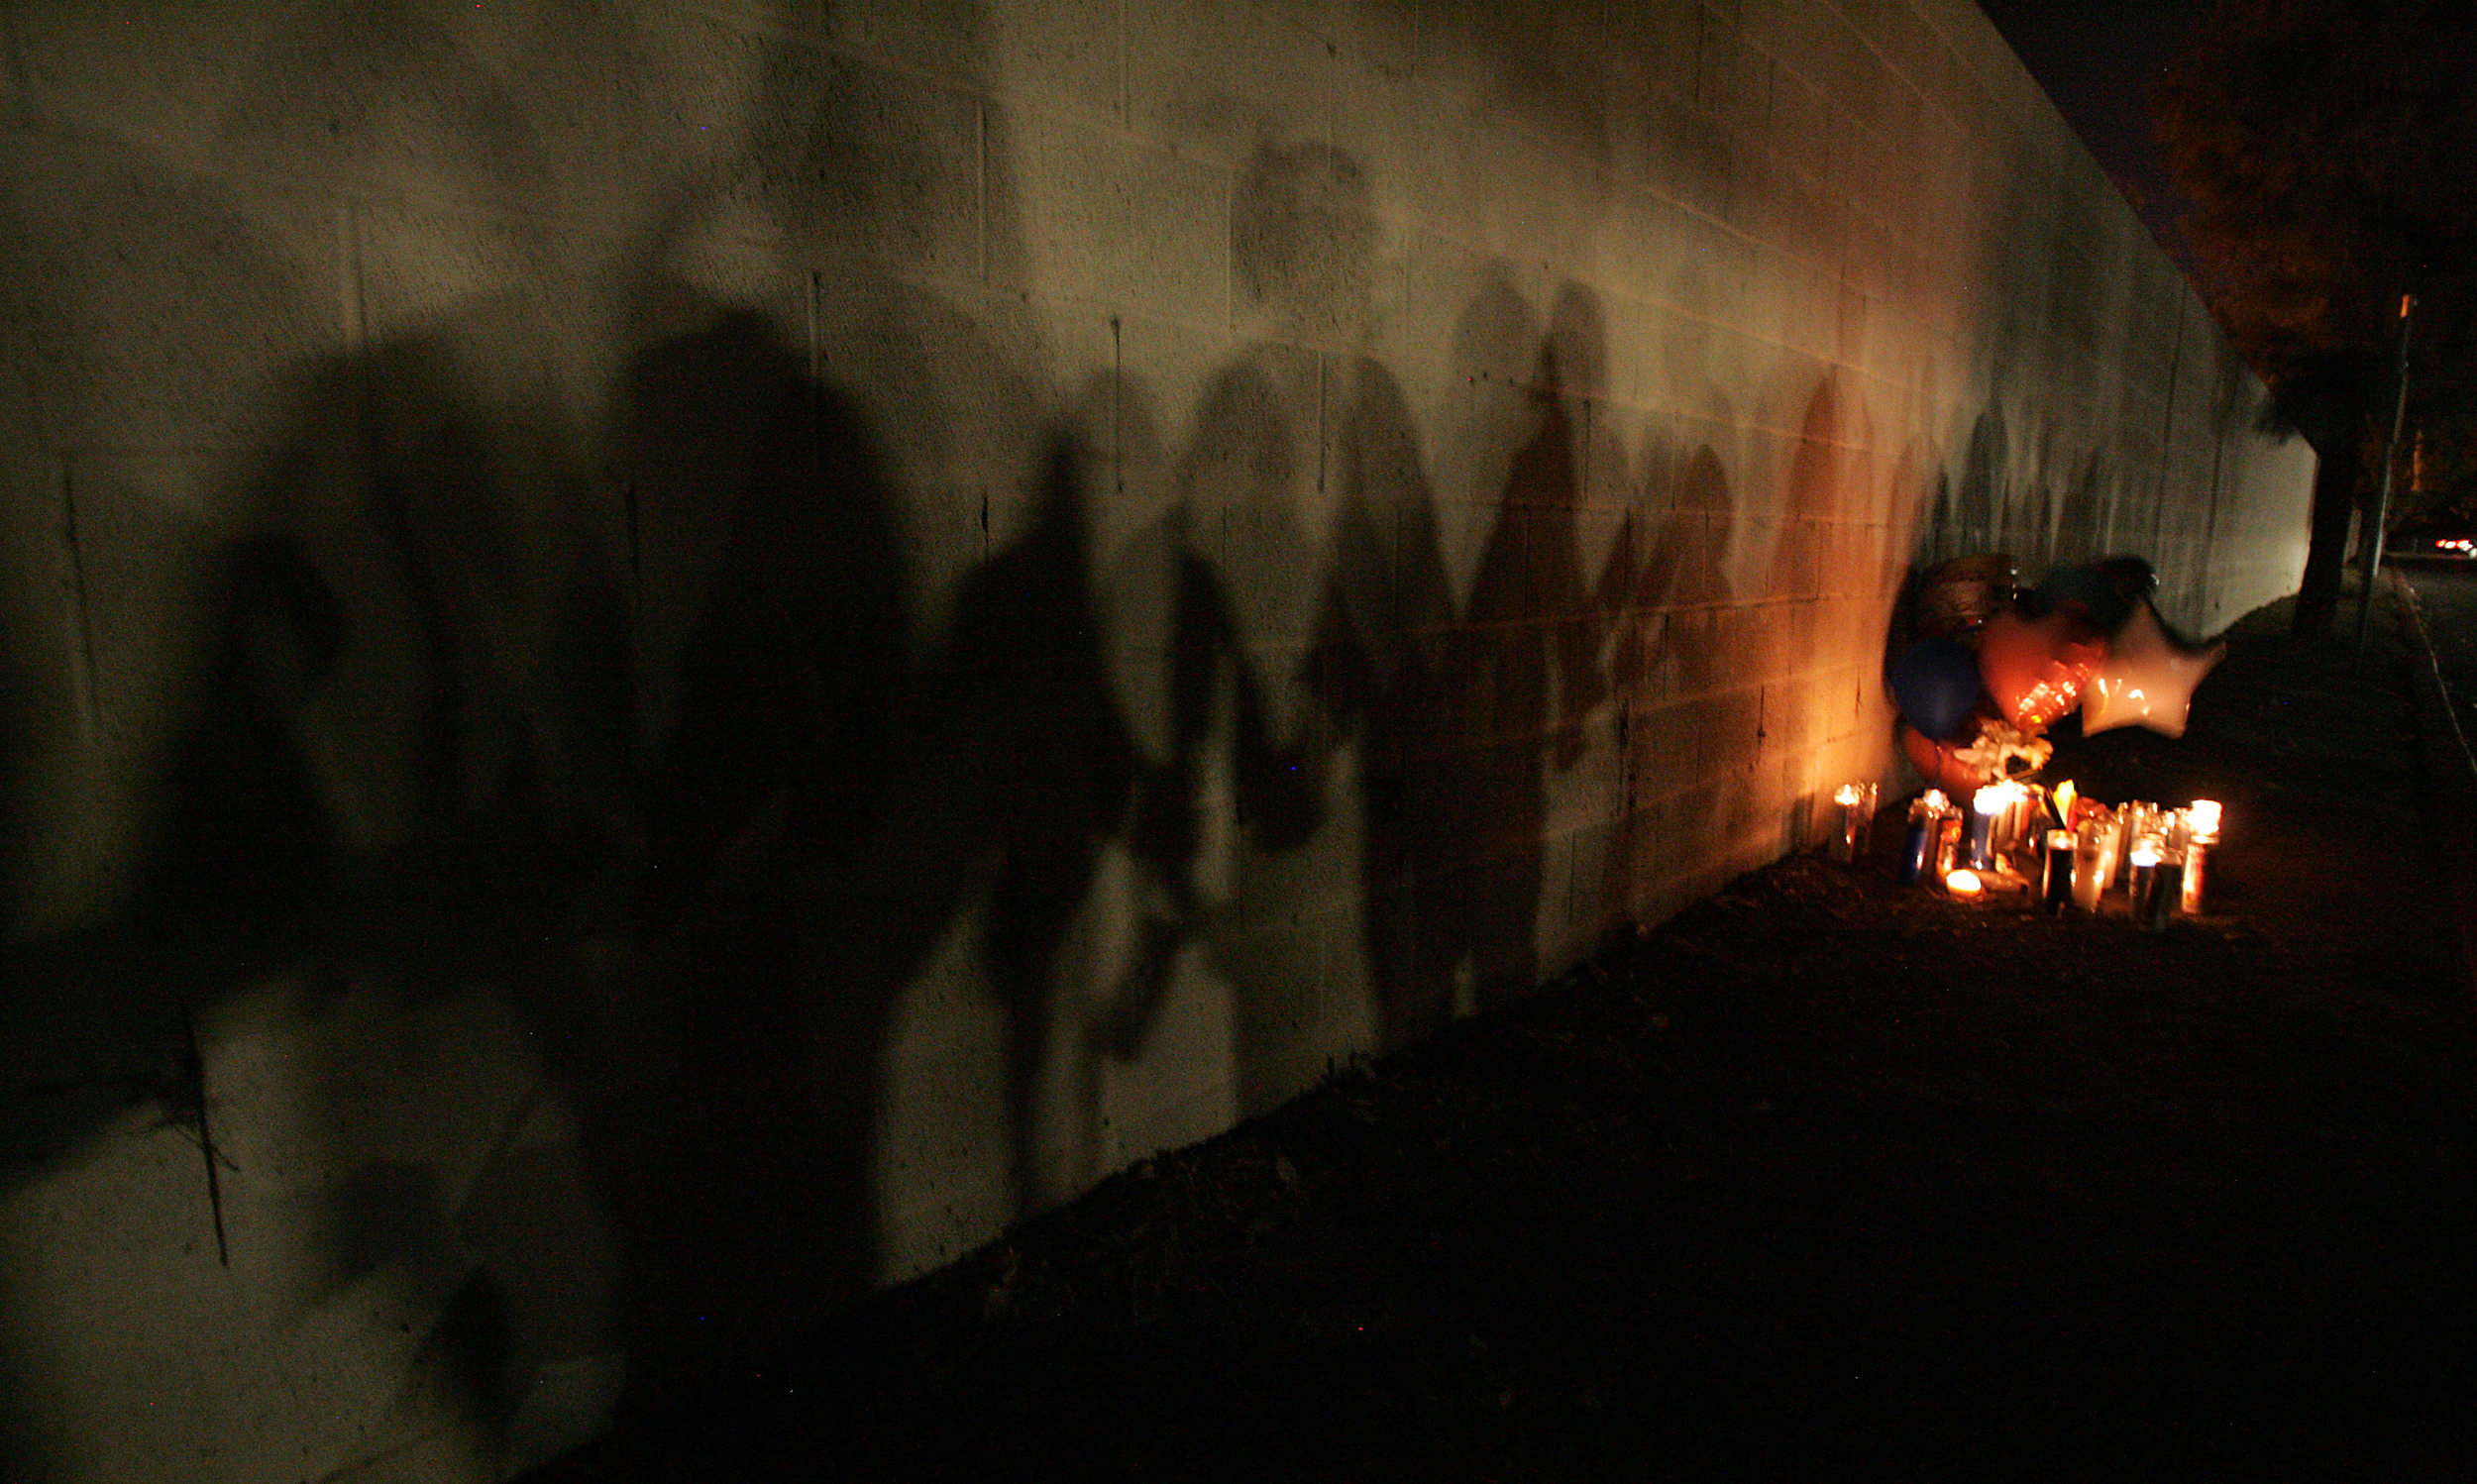  THe shadows of family and friends as they hold a candle light vigil for Isaac Kelly, 33, who was shot and killed by a security guard just after midnight in an apartment complex in the 150 block of E. Nuevo Road Saturday in Perris, CA. October 3, 201